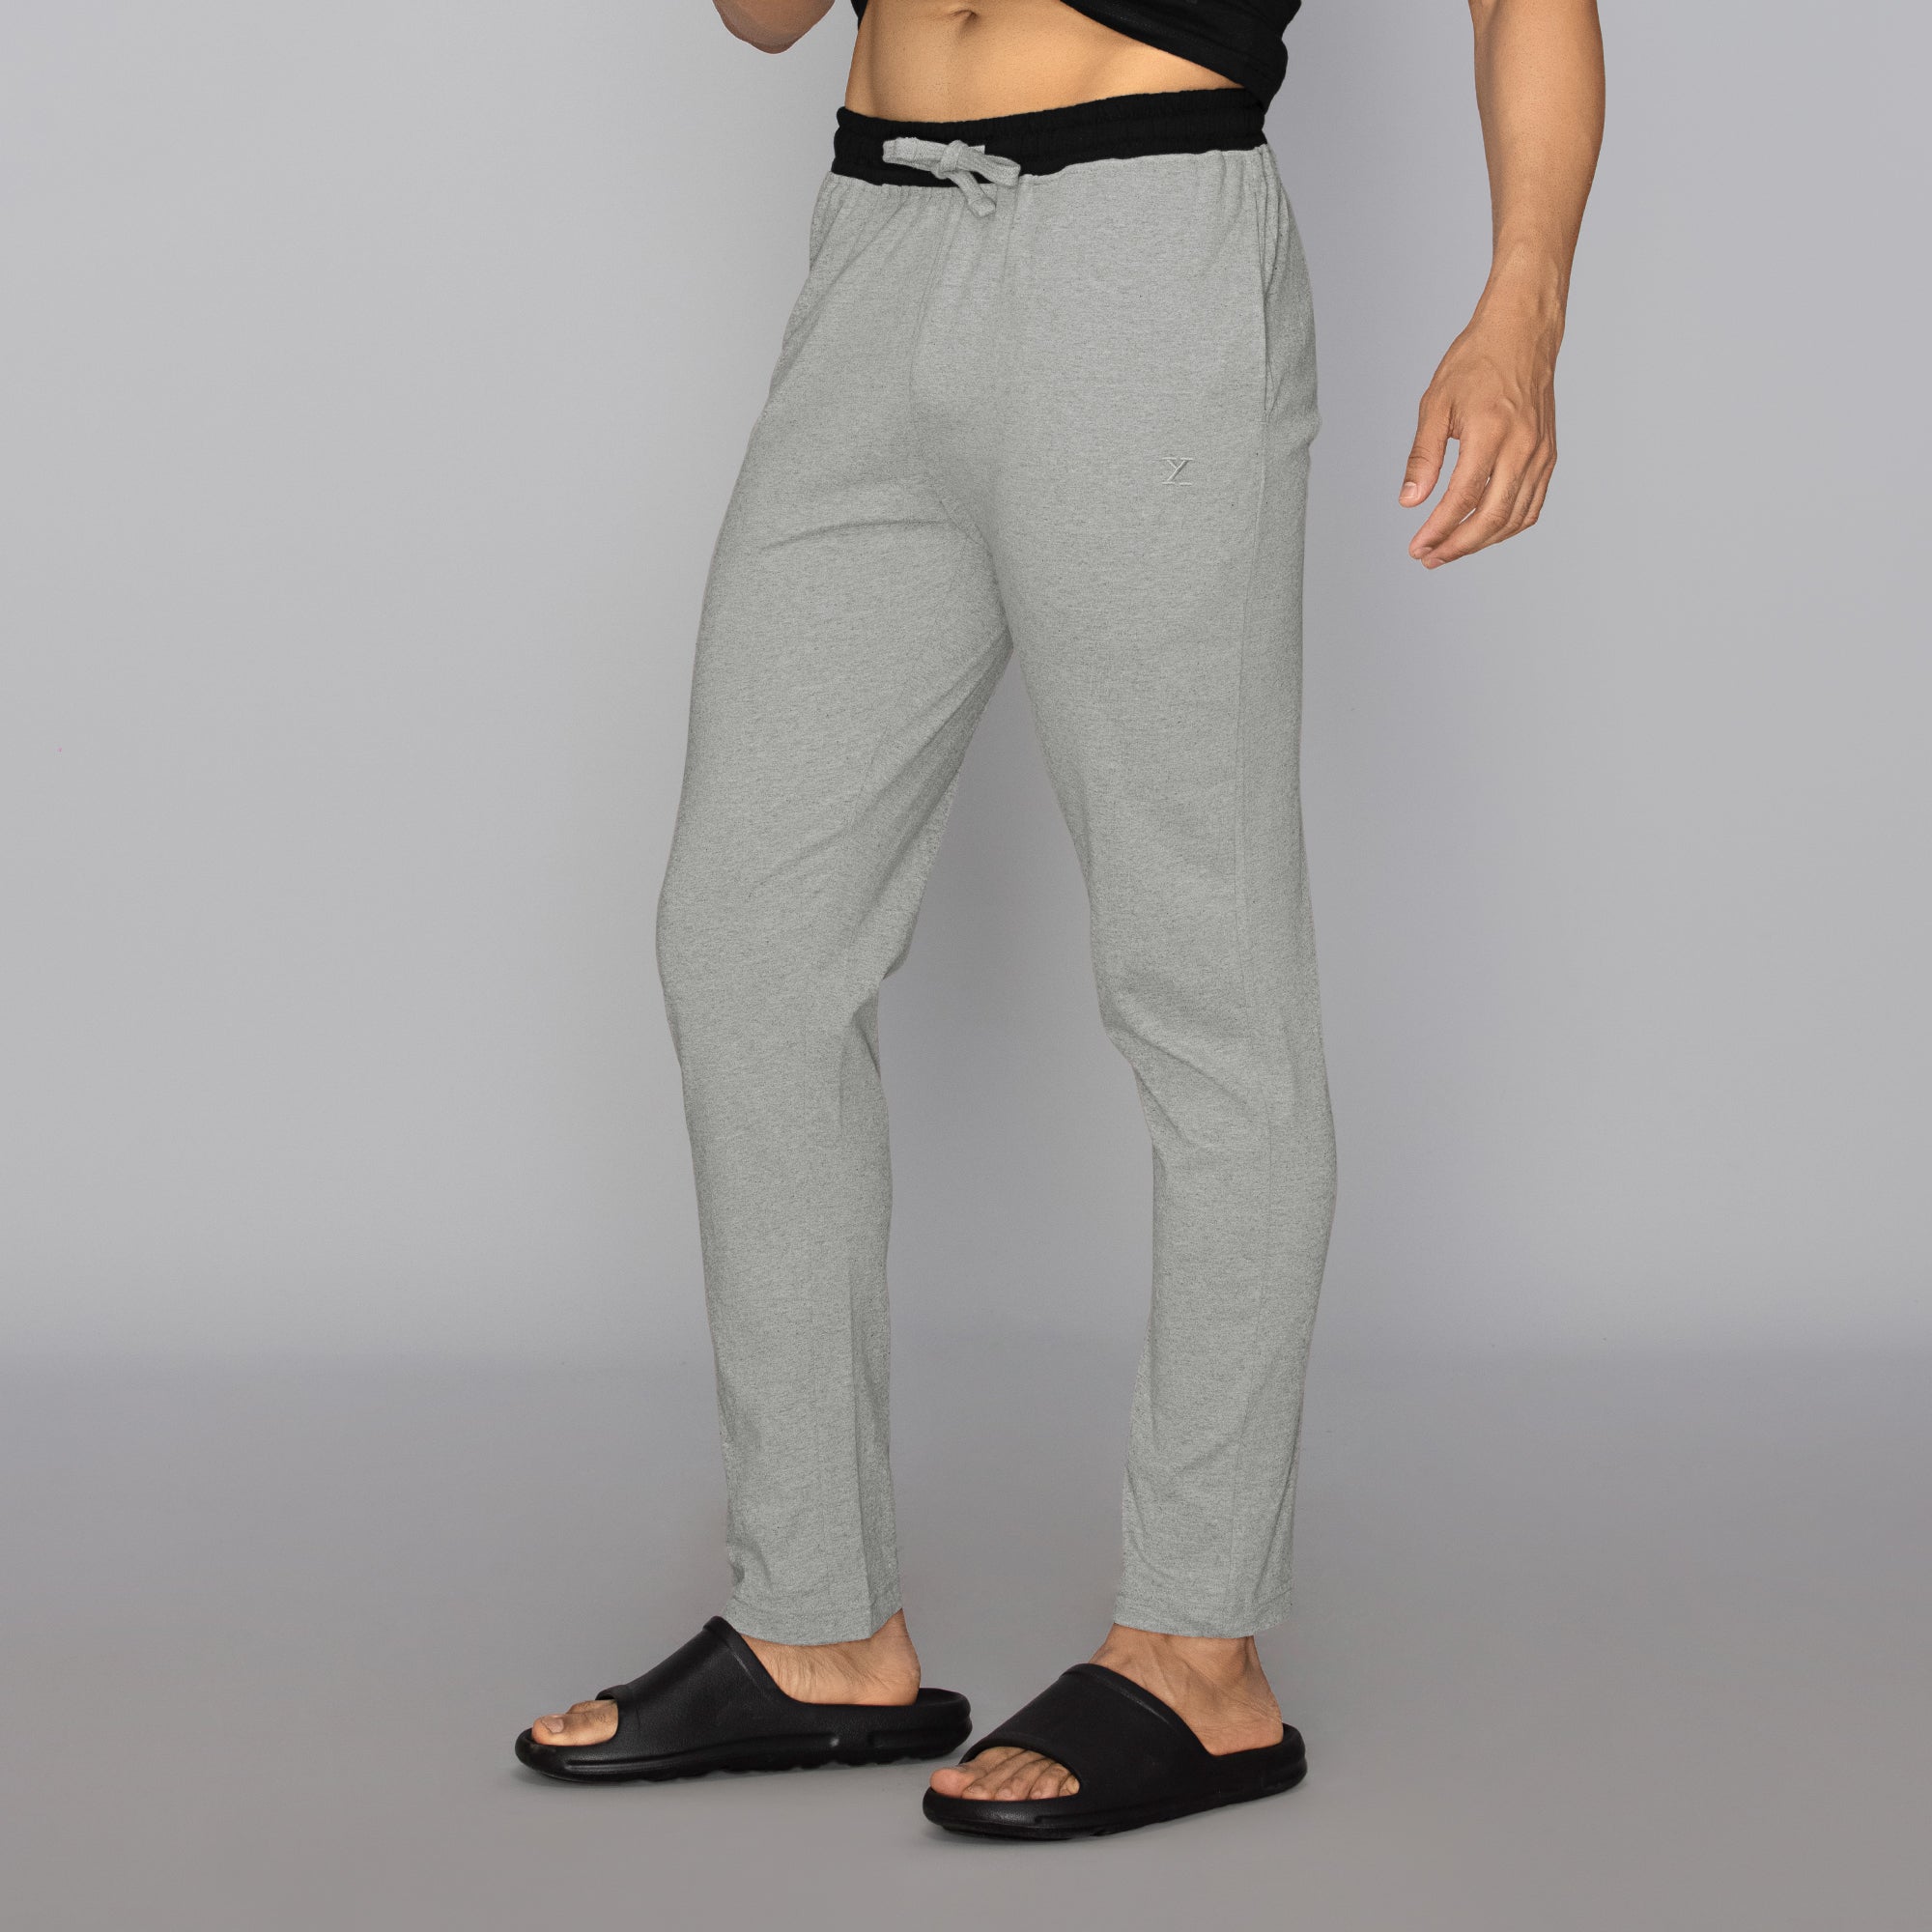 Latest Track pants for men brand-new, fashionable cotton loungewear  Sweatpants and Joggers for the streets.